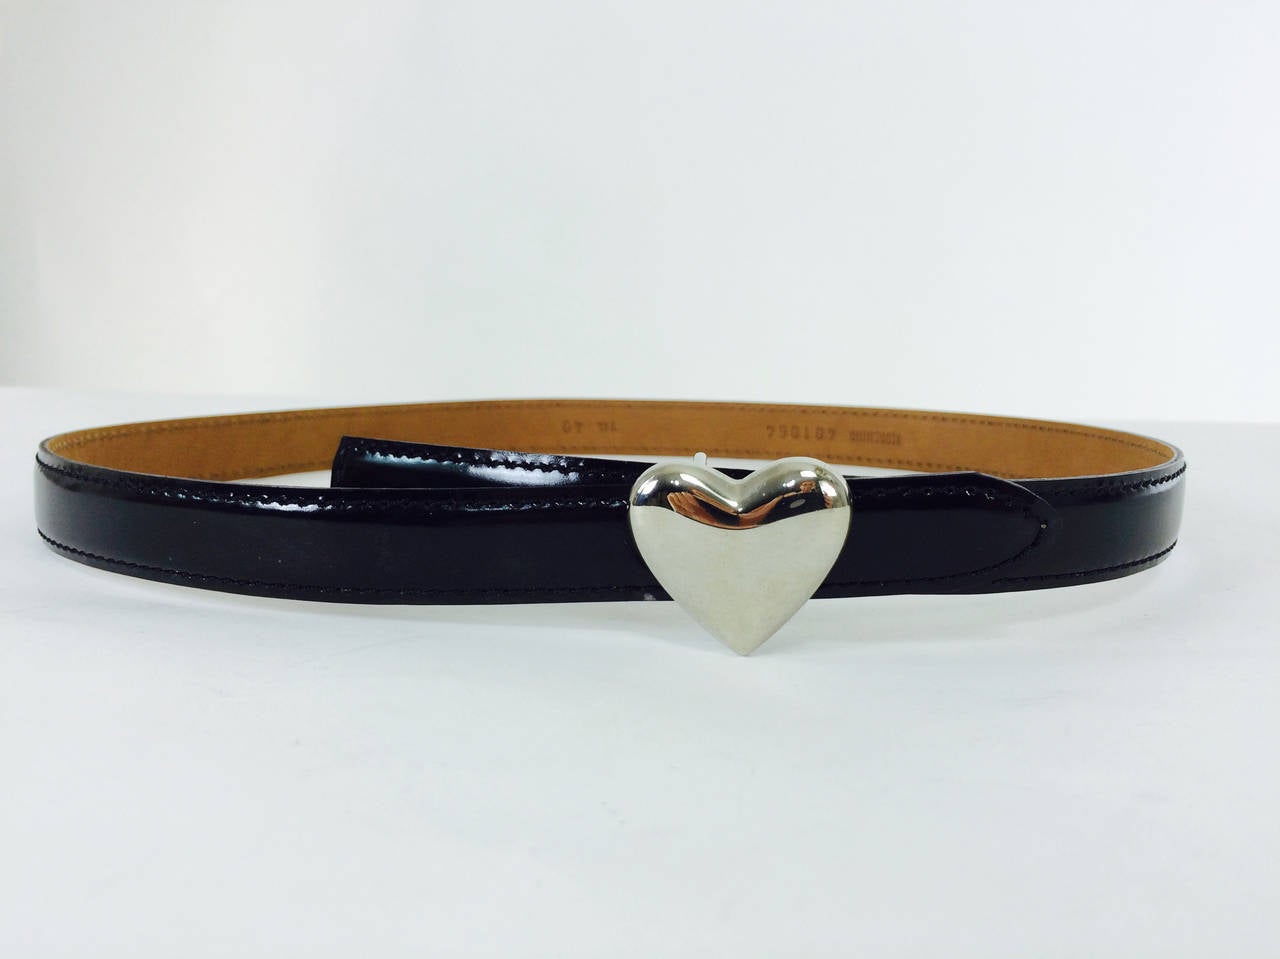 Moschino black patent belt with silver heart buckle...In excellent barely worn condition...33